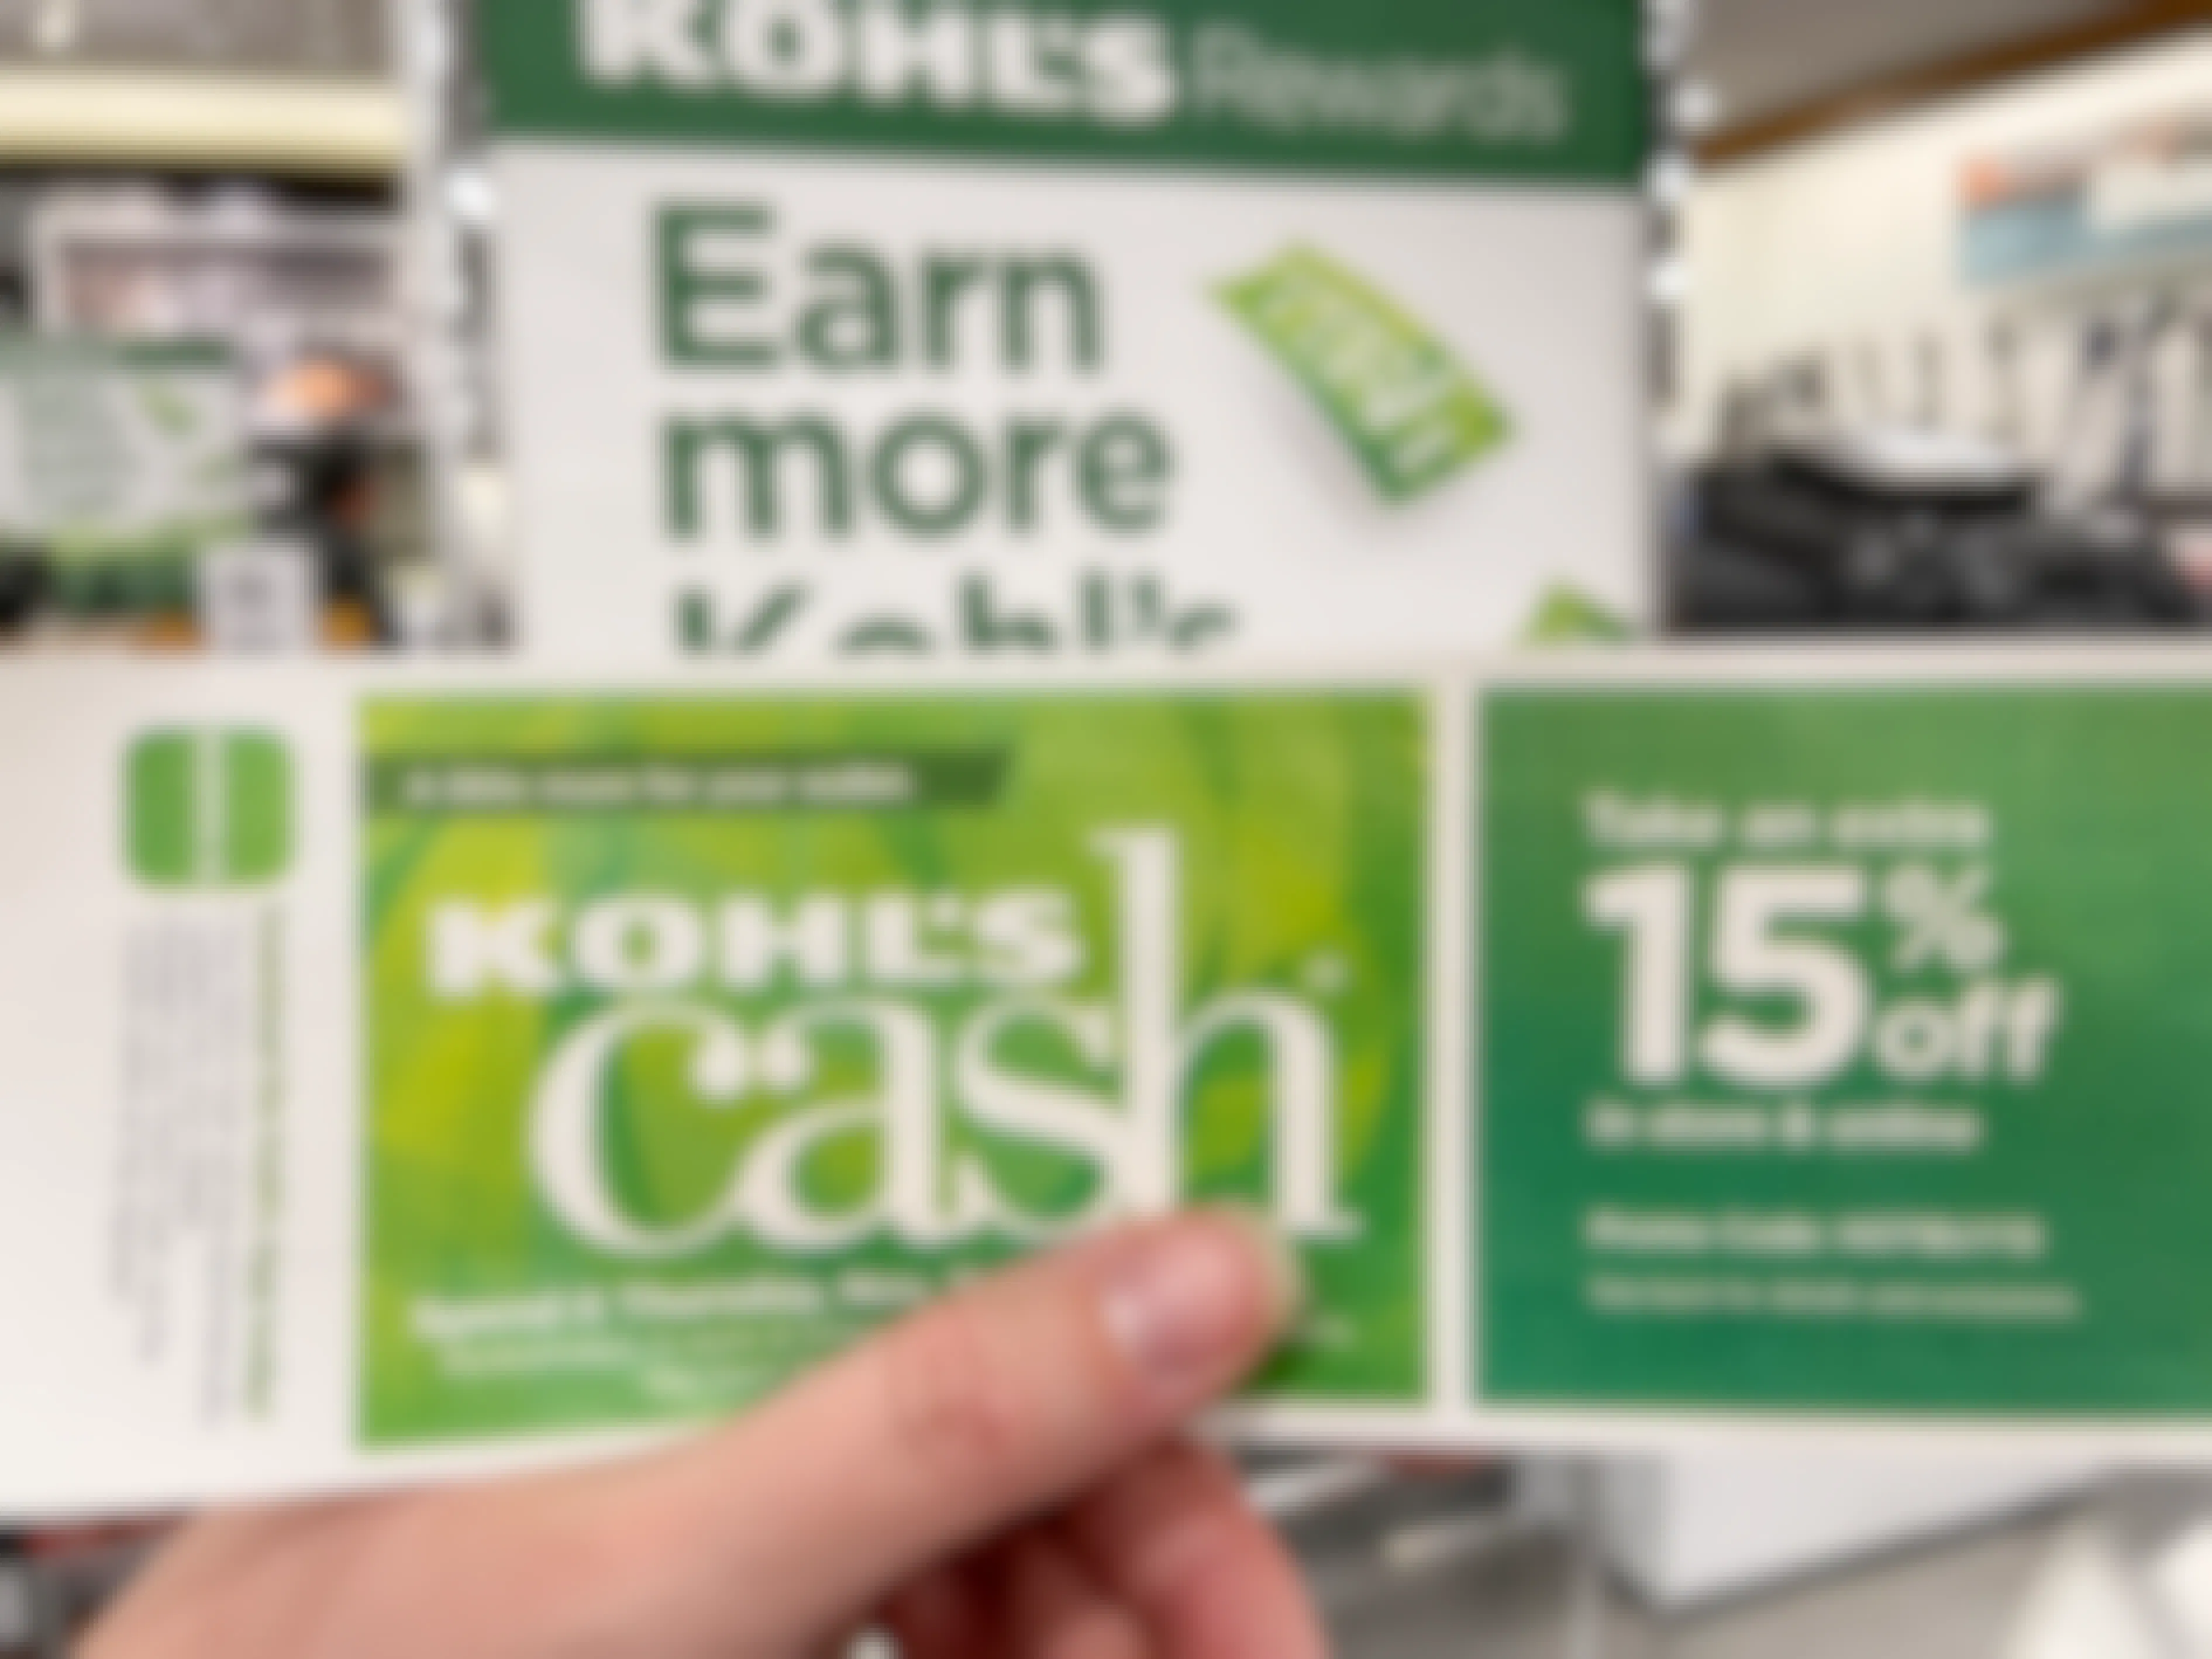 A person holding Kohl's Cash in front of a Kohl's Rewards sign.